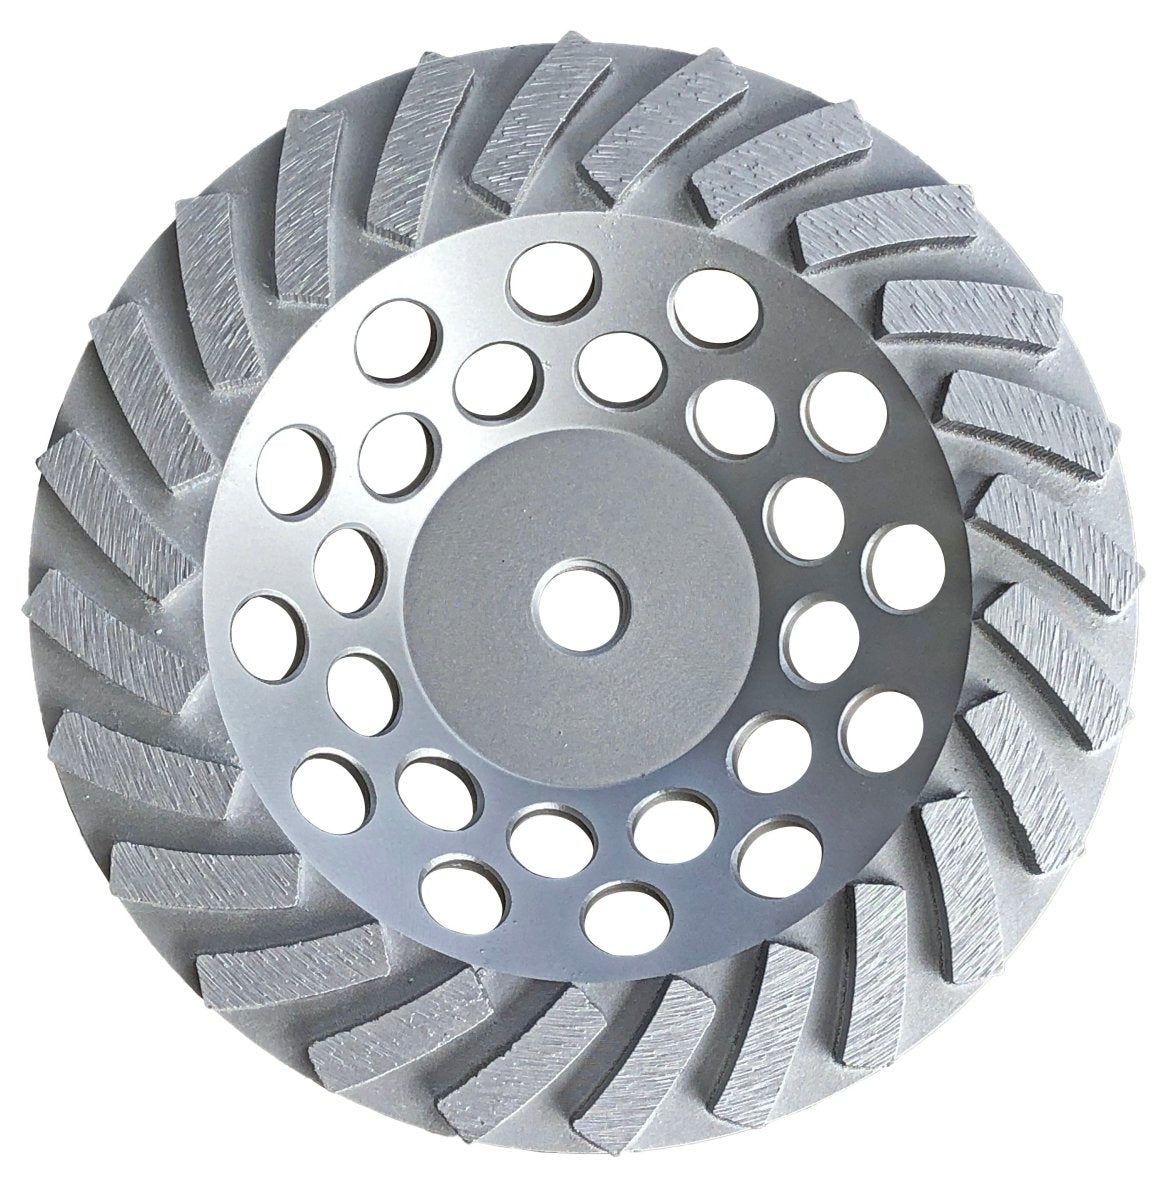 Ox Ultimate Spiral Cup Wheel 7" 24 Segments - 5/8"-11 Threaded Arbor - Ox Tools